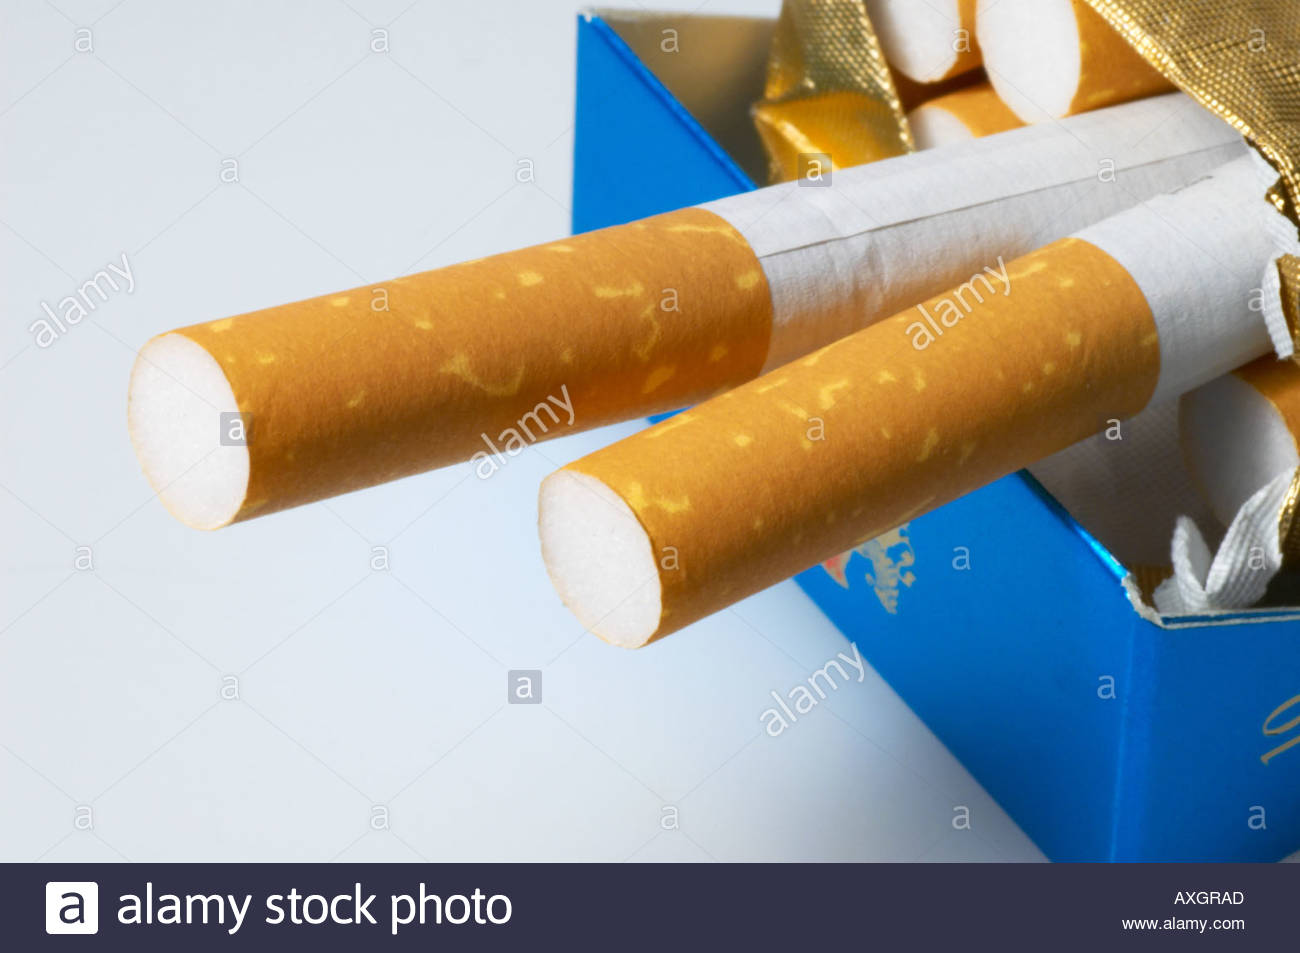 Red white and blue packet of Royals Superkings cigarettes with smoking  seriously damages health warning UK Stock Photo - Alamy